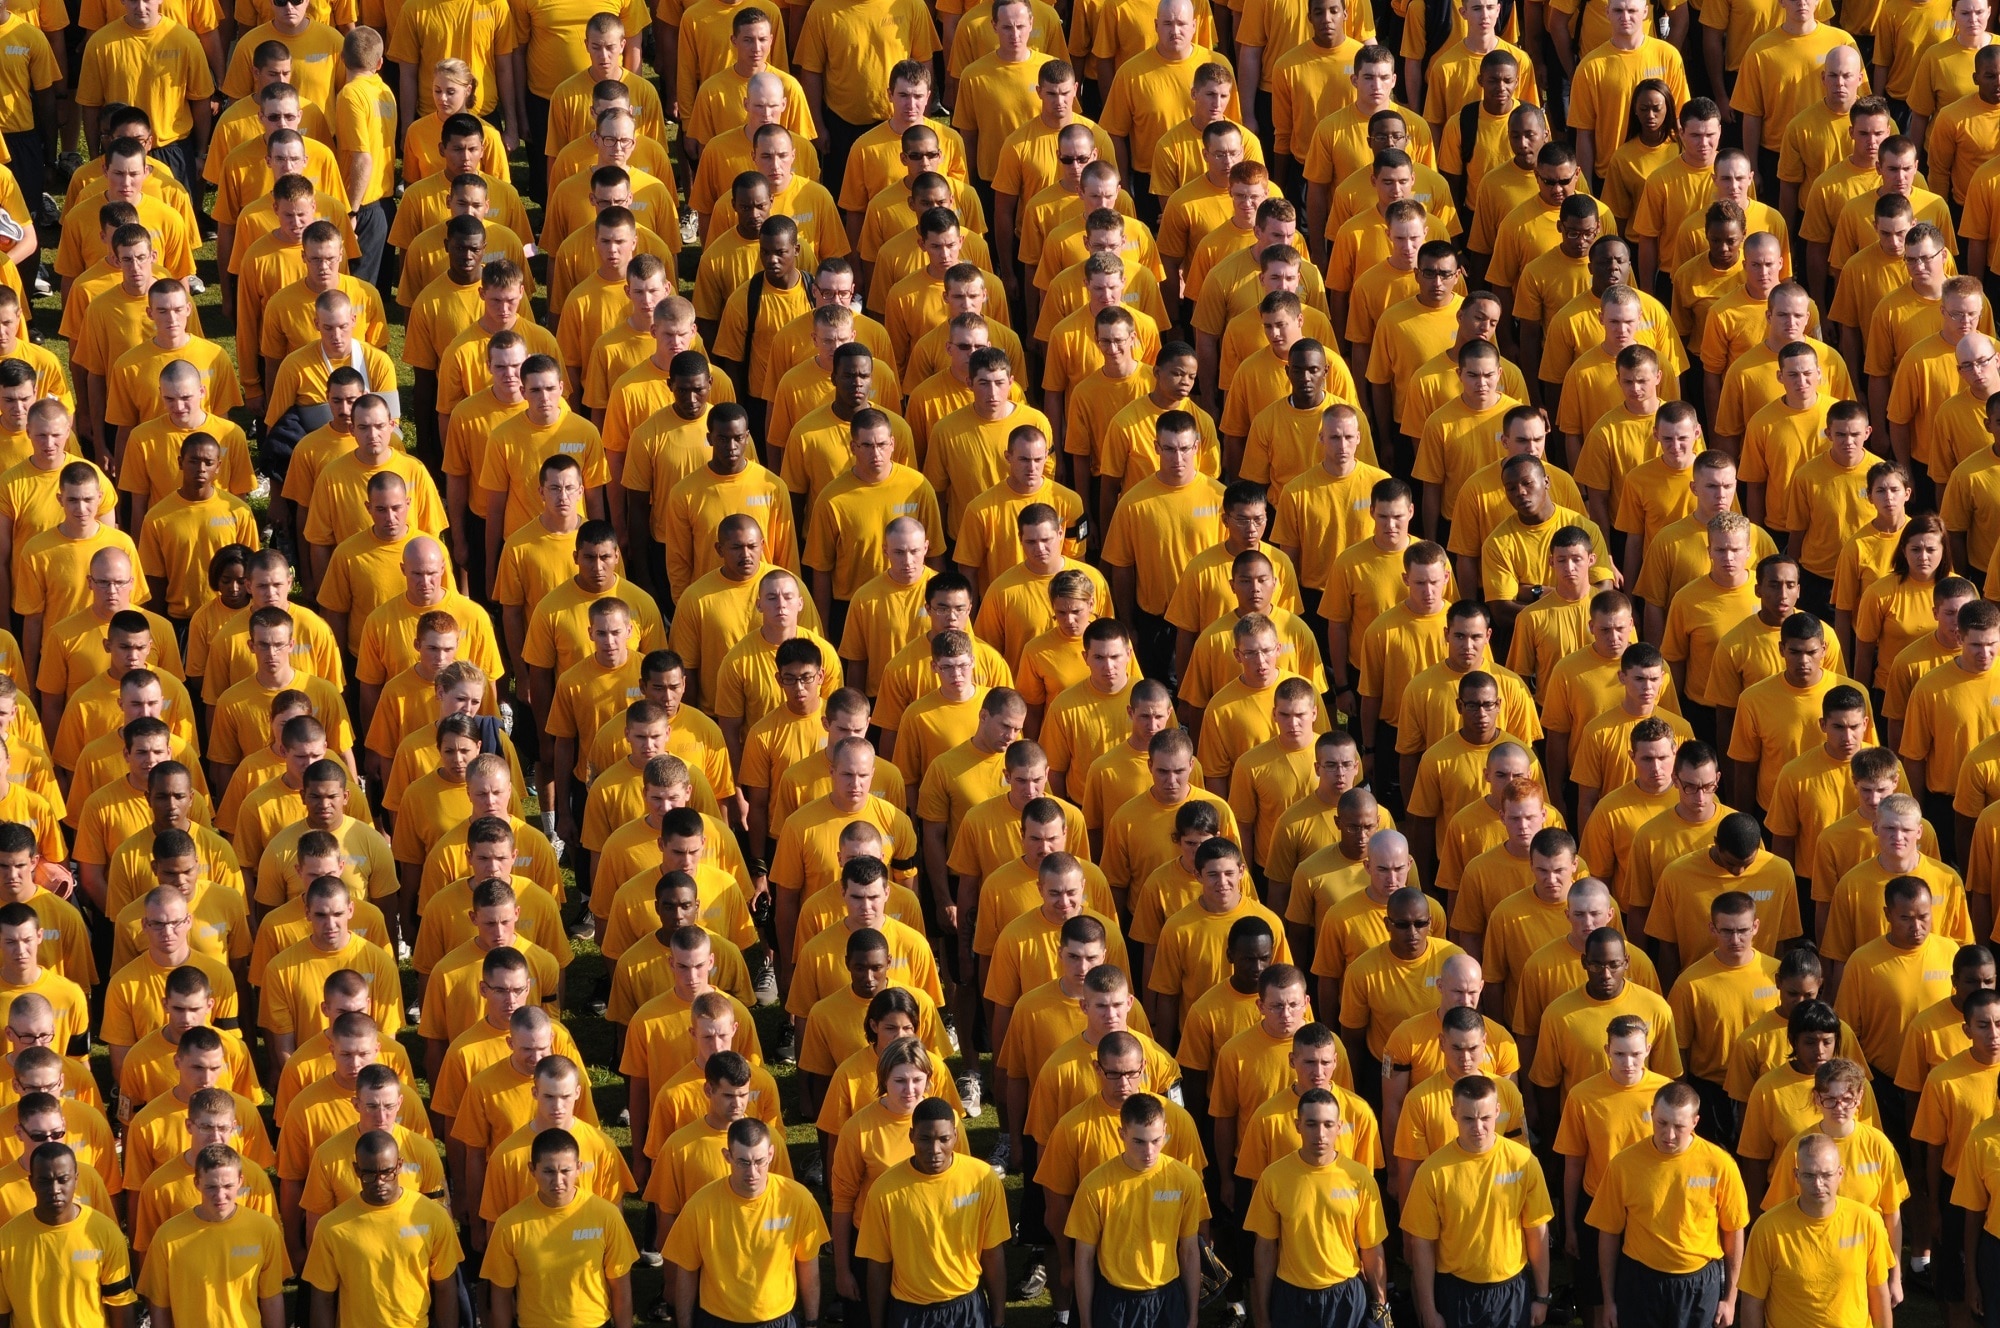 group of people wearing yellow shirt in formation